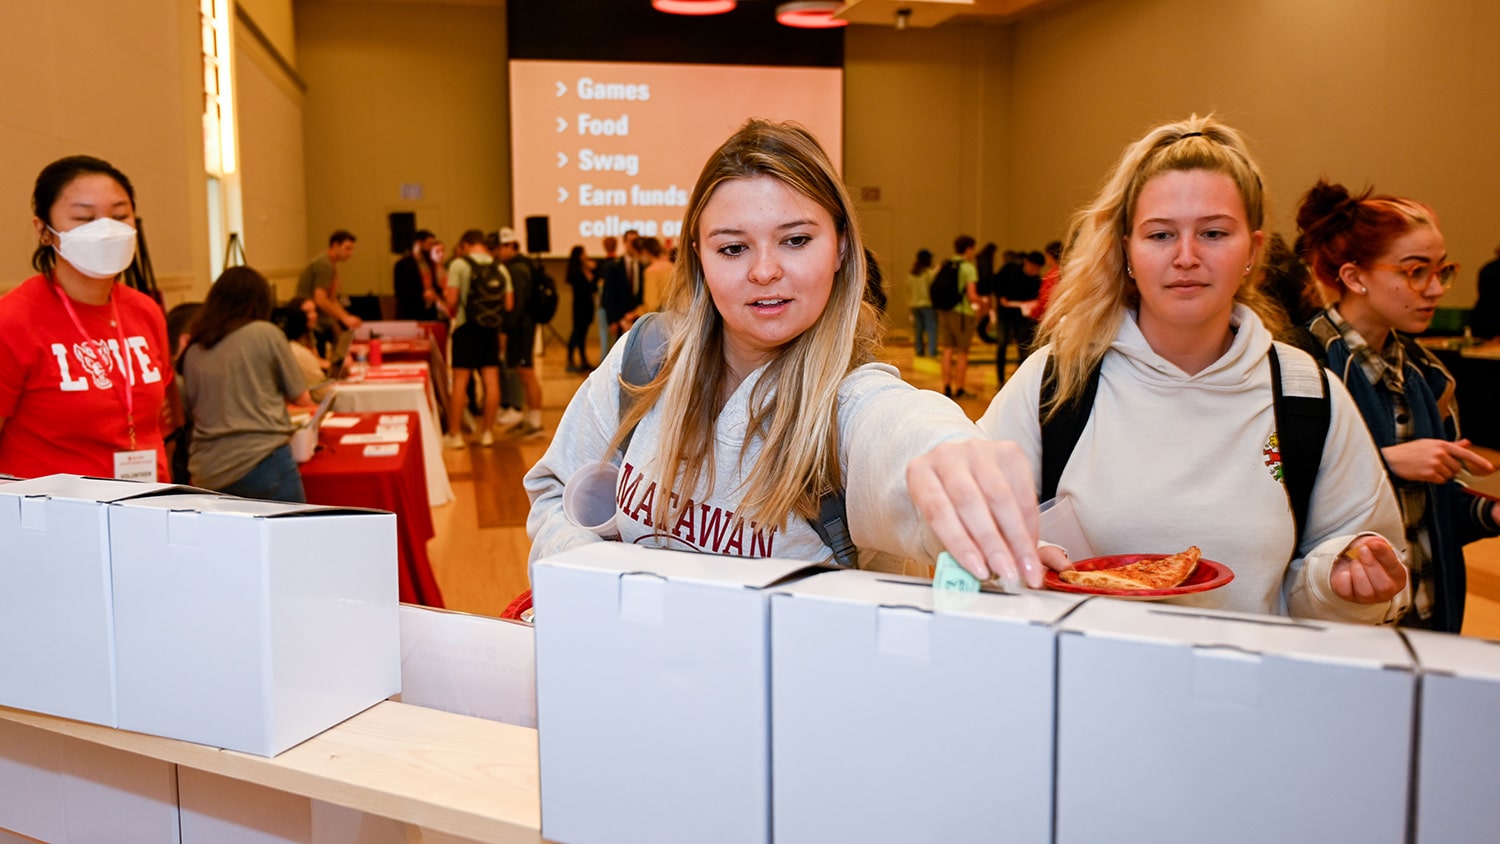 Students vote for their favorite units to win bonus funds during the 2022 Day of Giving student event